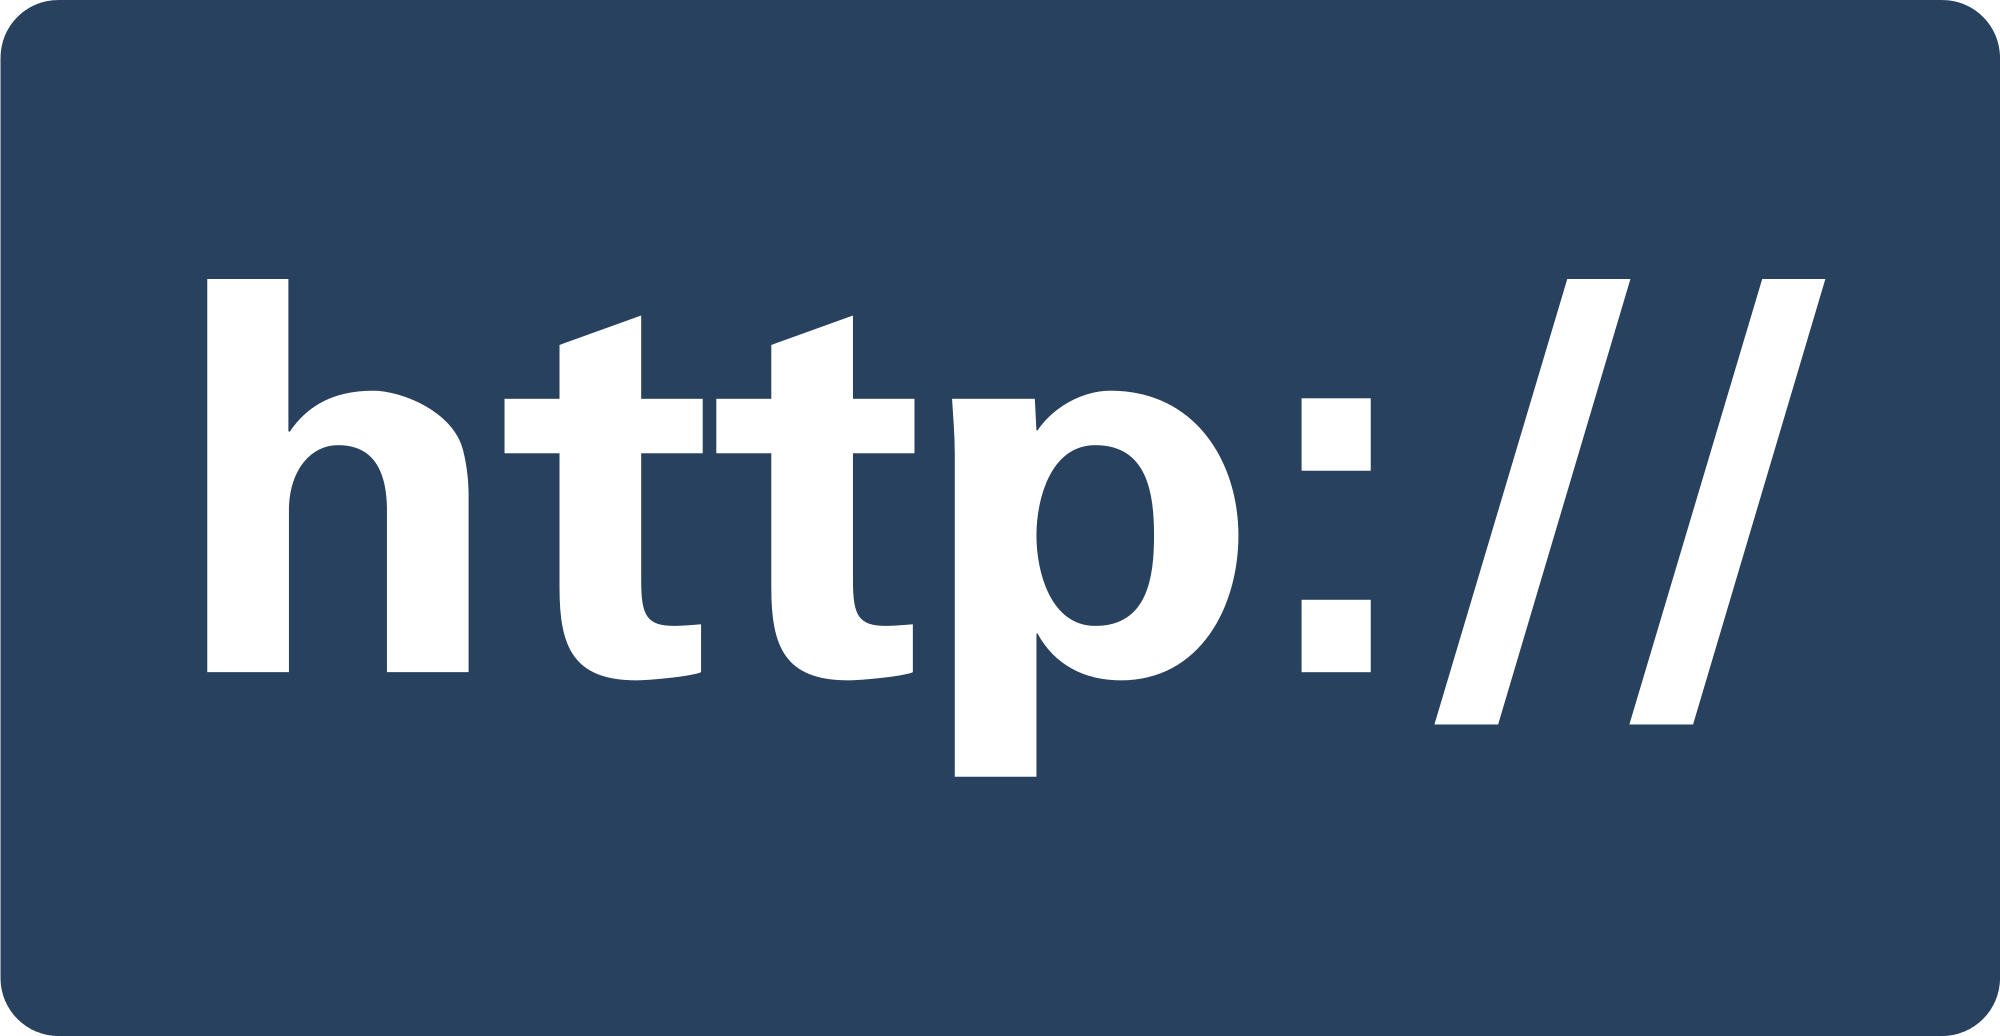 what is http